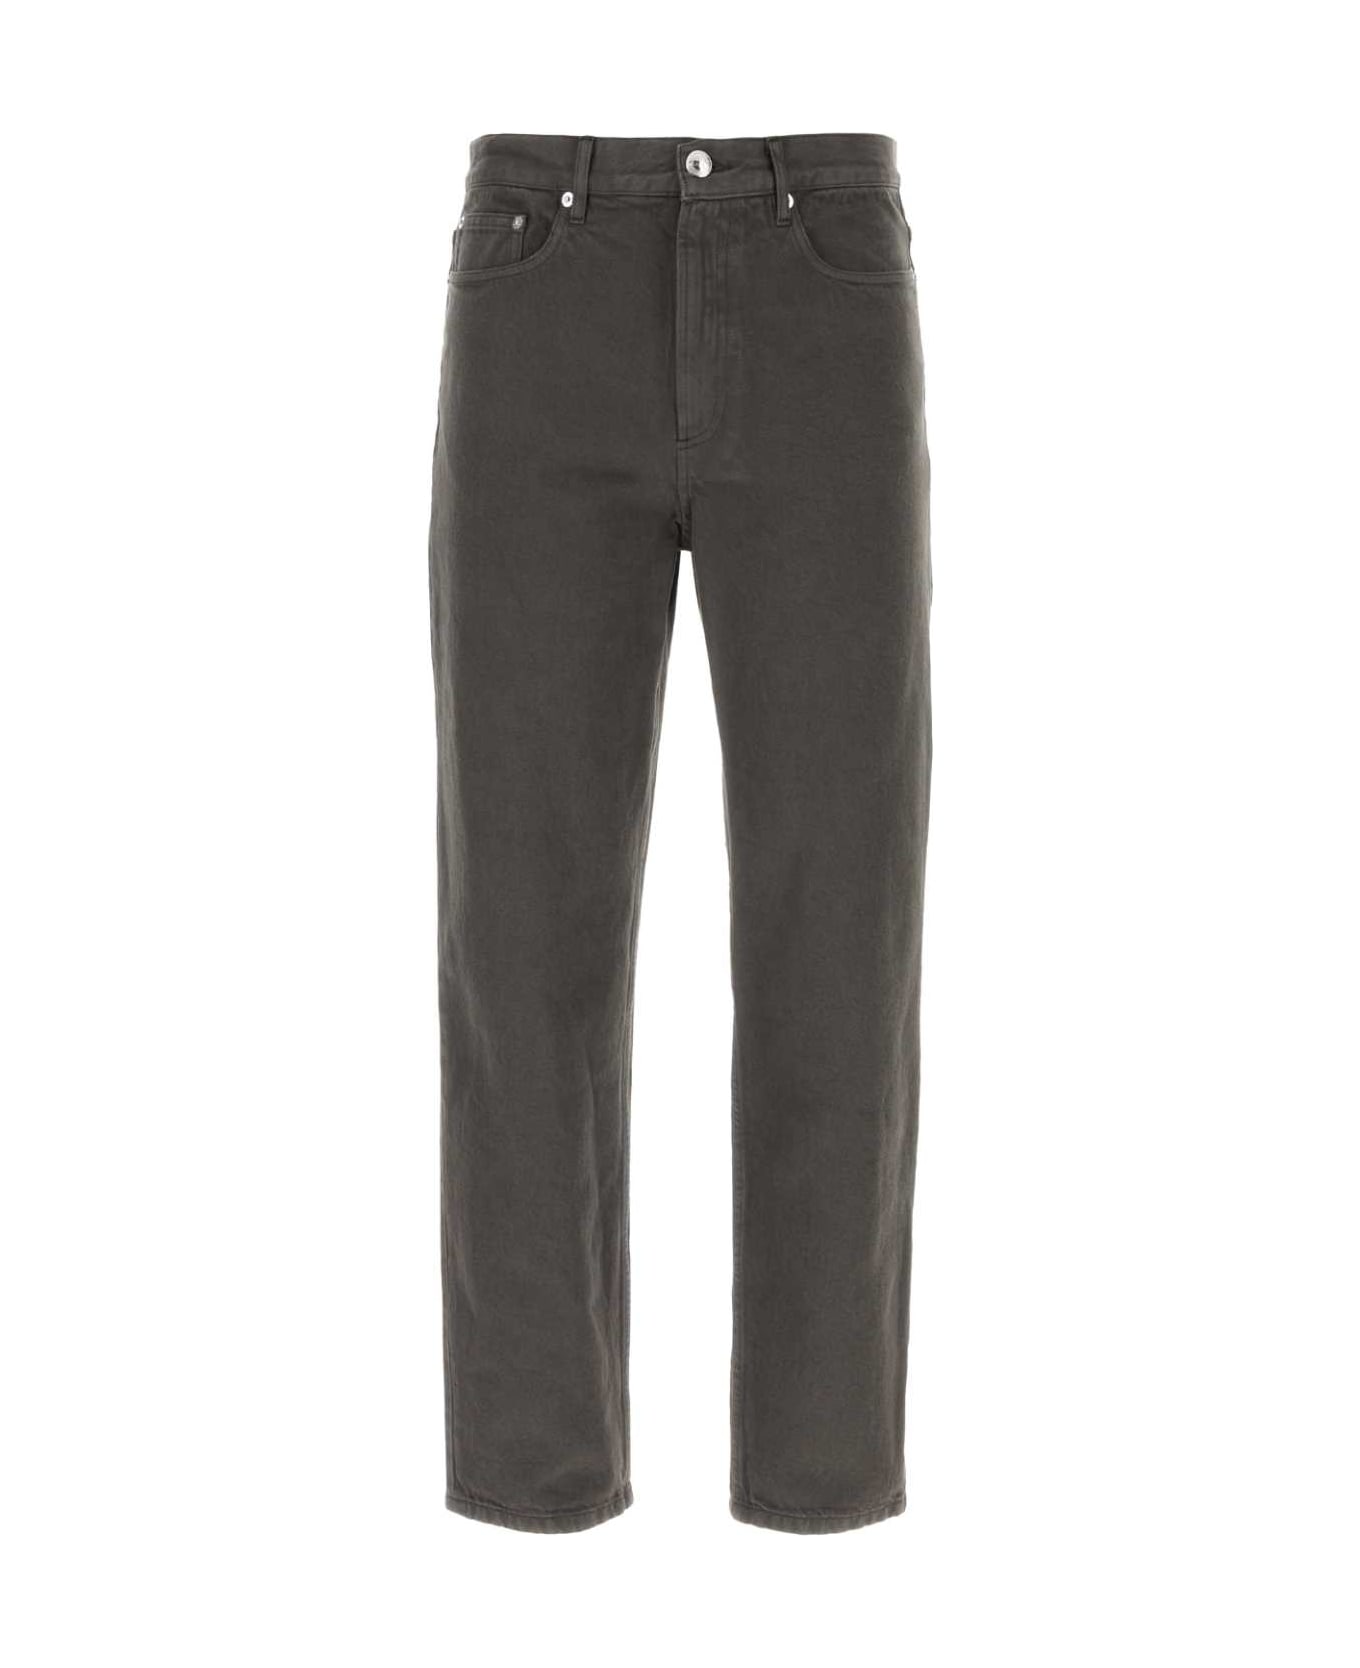 A.P.C. Martin Jeans - ANTHRACITE